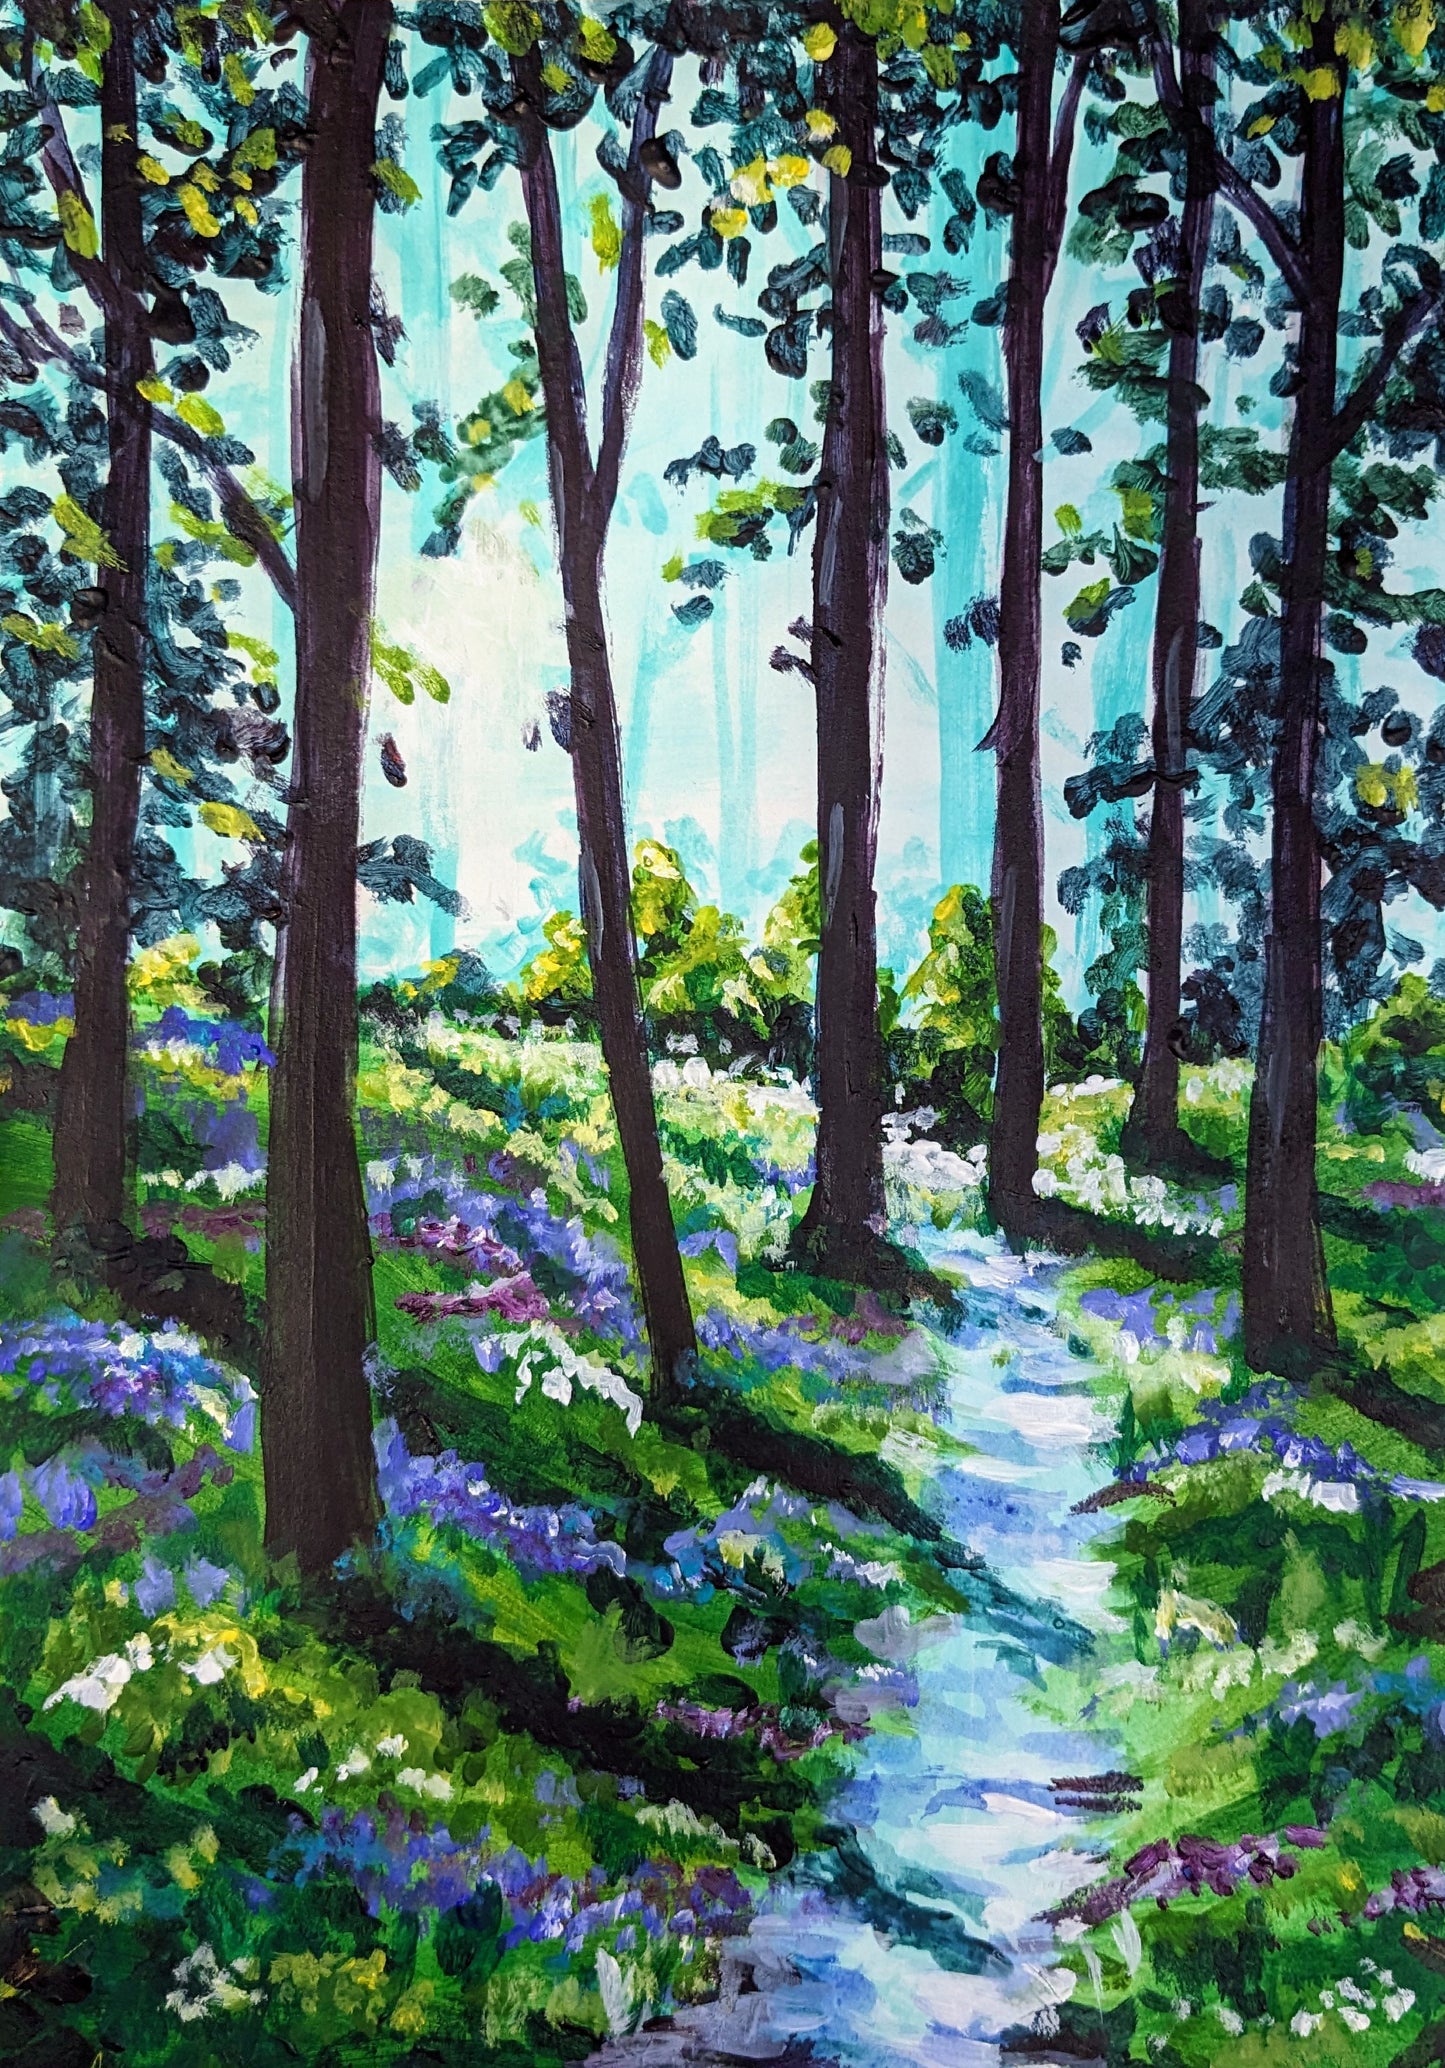 DAPPLED WOODLAND - Painting Workshop at The Howard Centre, Welwyn, Hertfordshire - Thursday 15th February